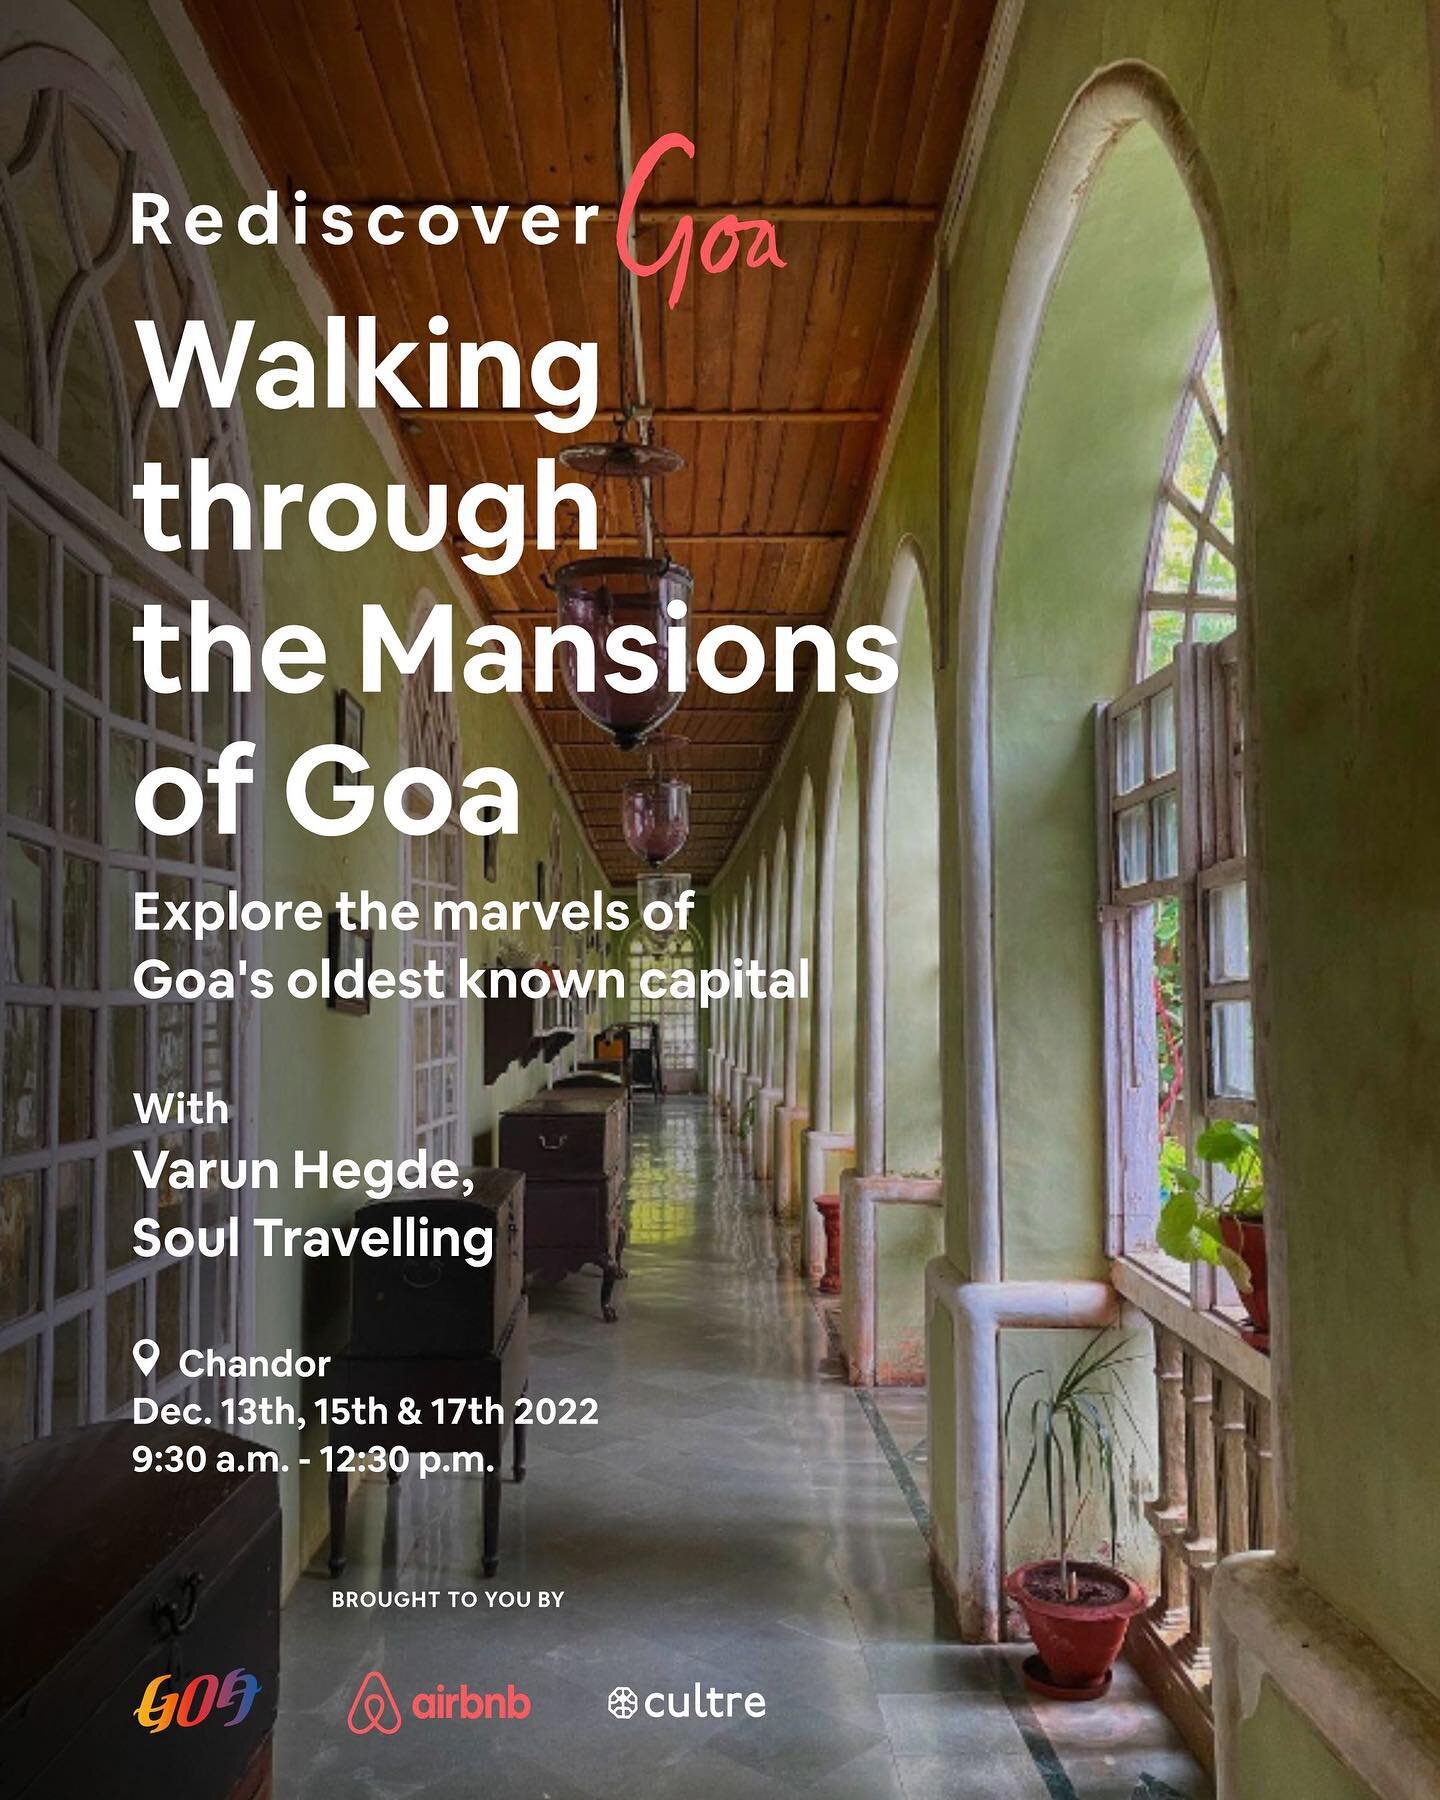 Revisit the glorious pasts and legends of a queen&rsquo;s curse as you steer through the lanes of Chandor - exploring years old Indo-Portugese mansions. Get a taste of Goan royalty by booking your spot today. Link in bio.

#ResdiscoverGoa 
@goatouris